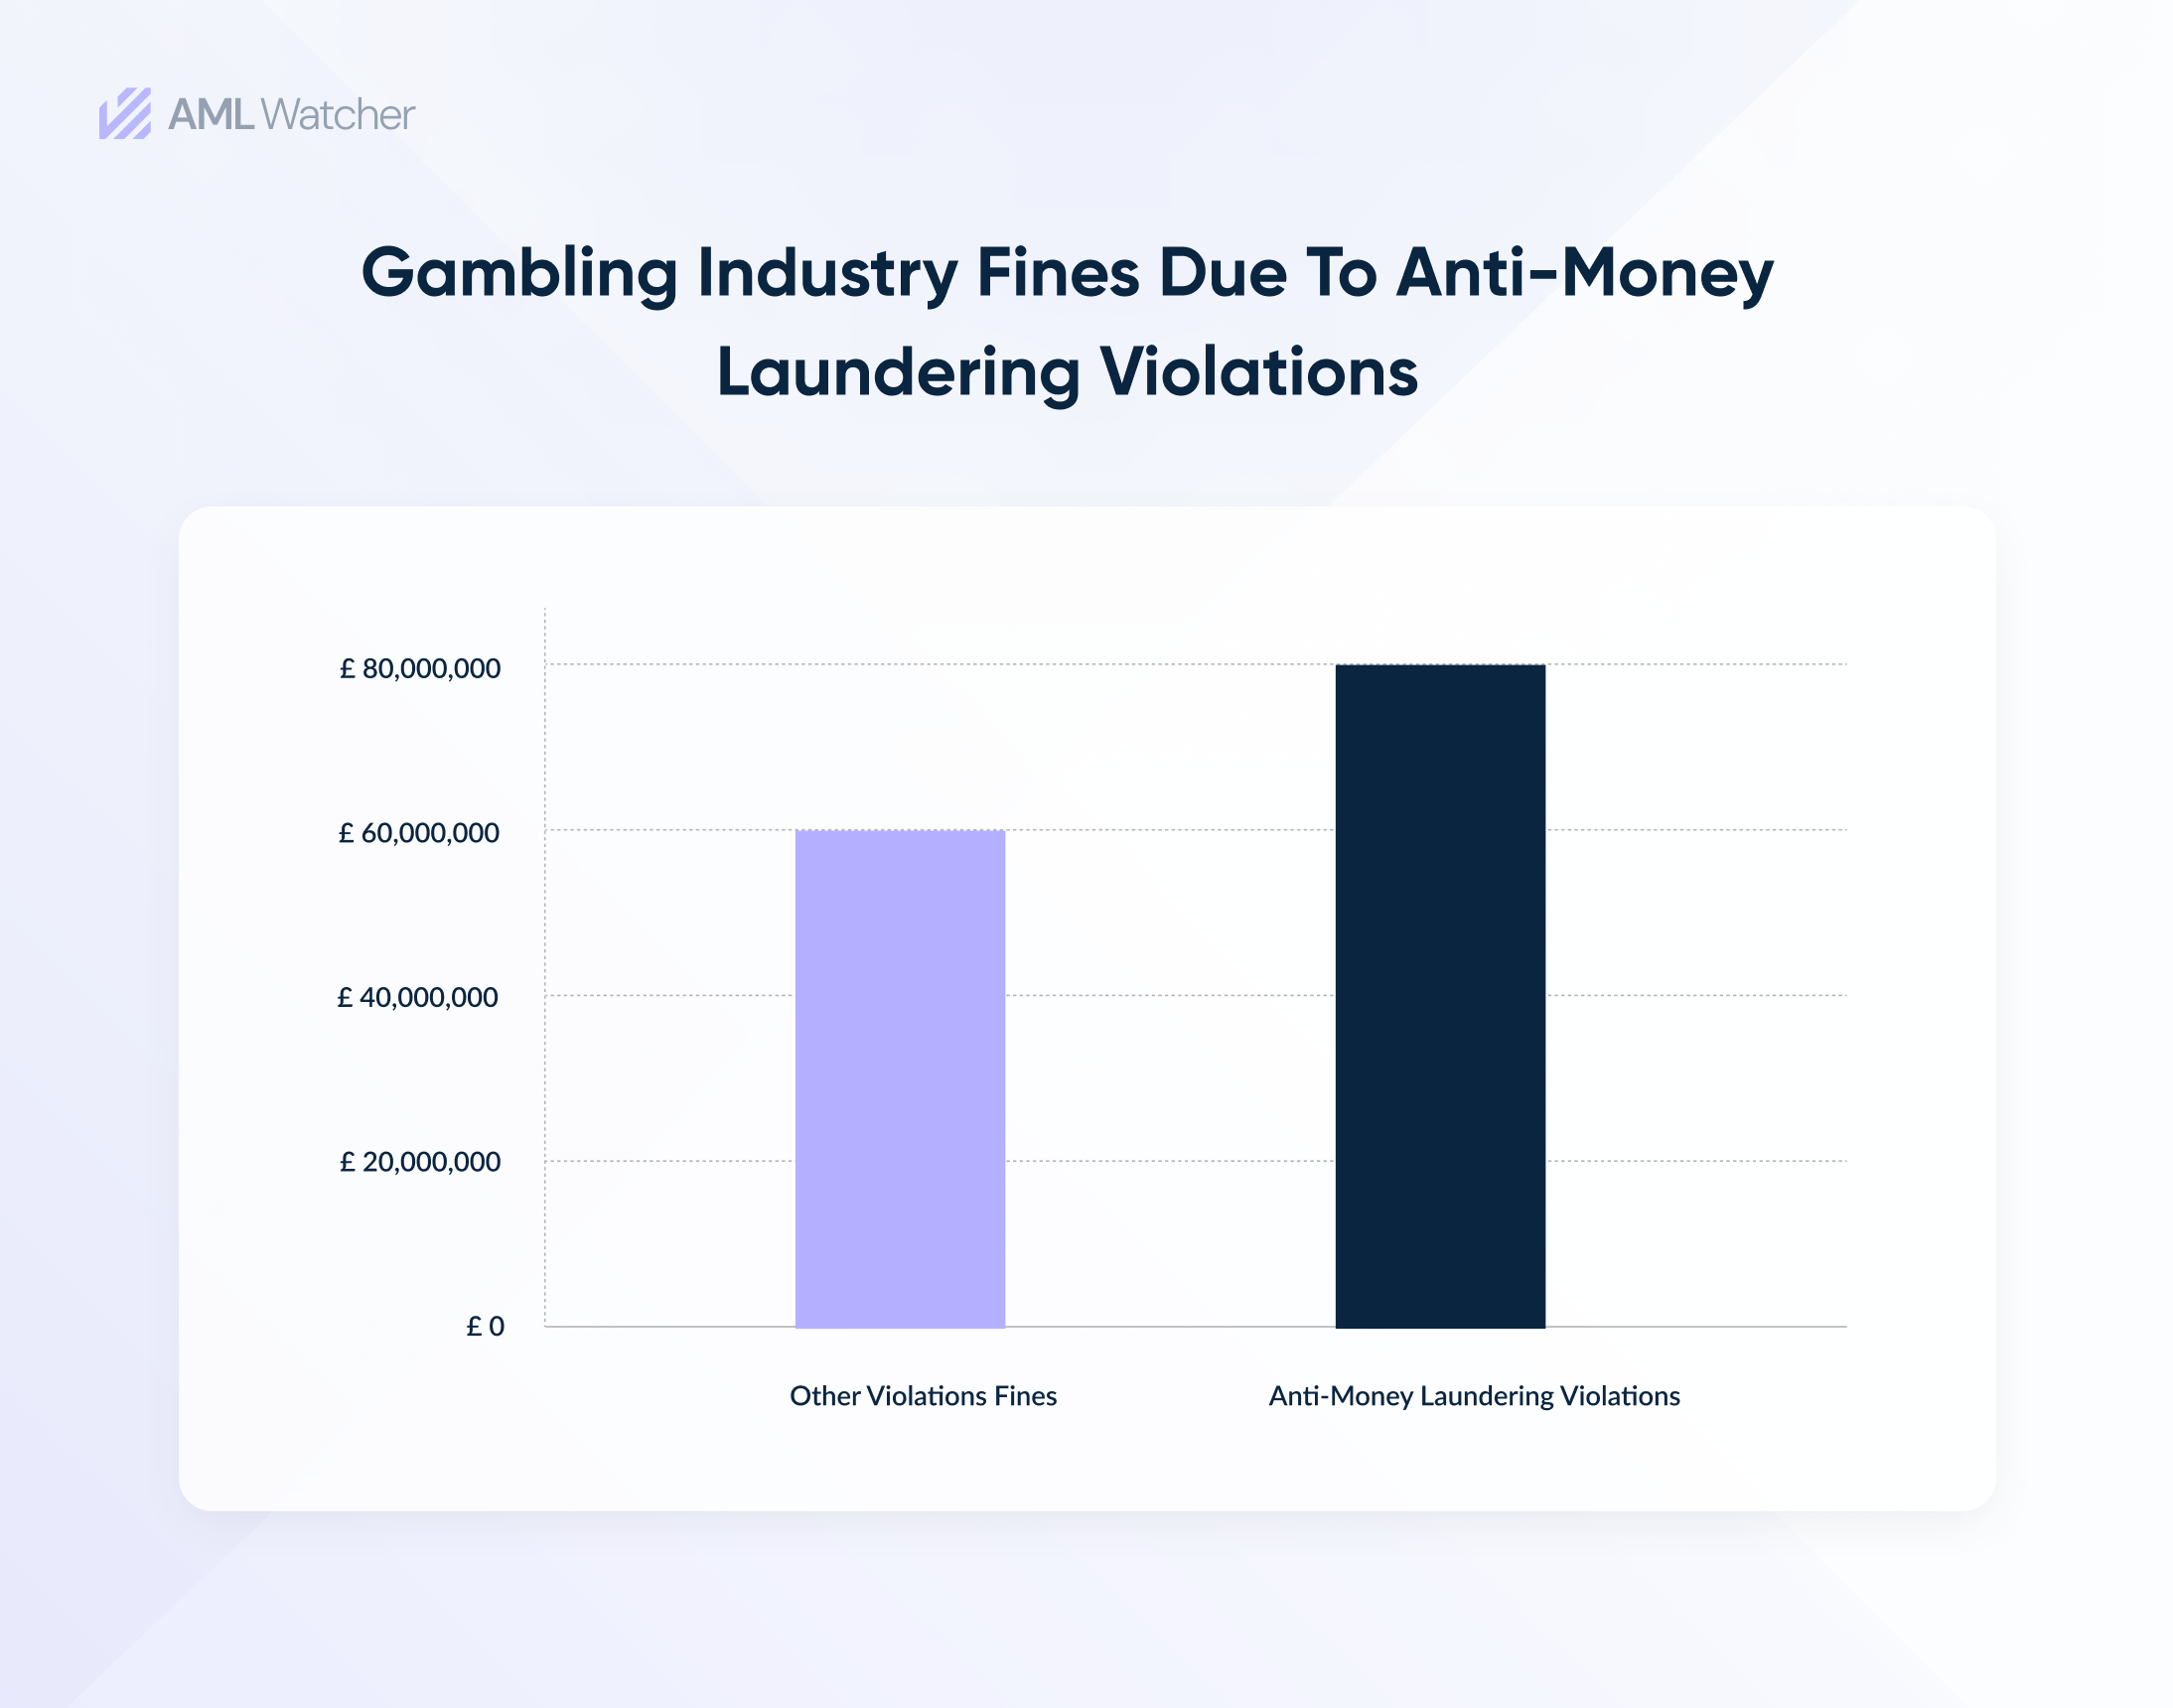 The image shows the graph for fines faced by the gaming industry due to noncompliance with AML rules. 